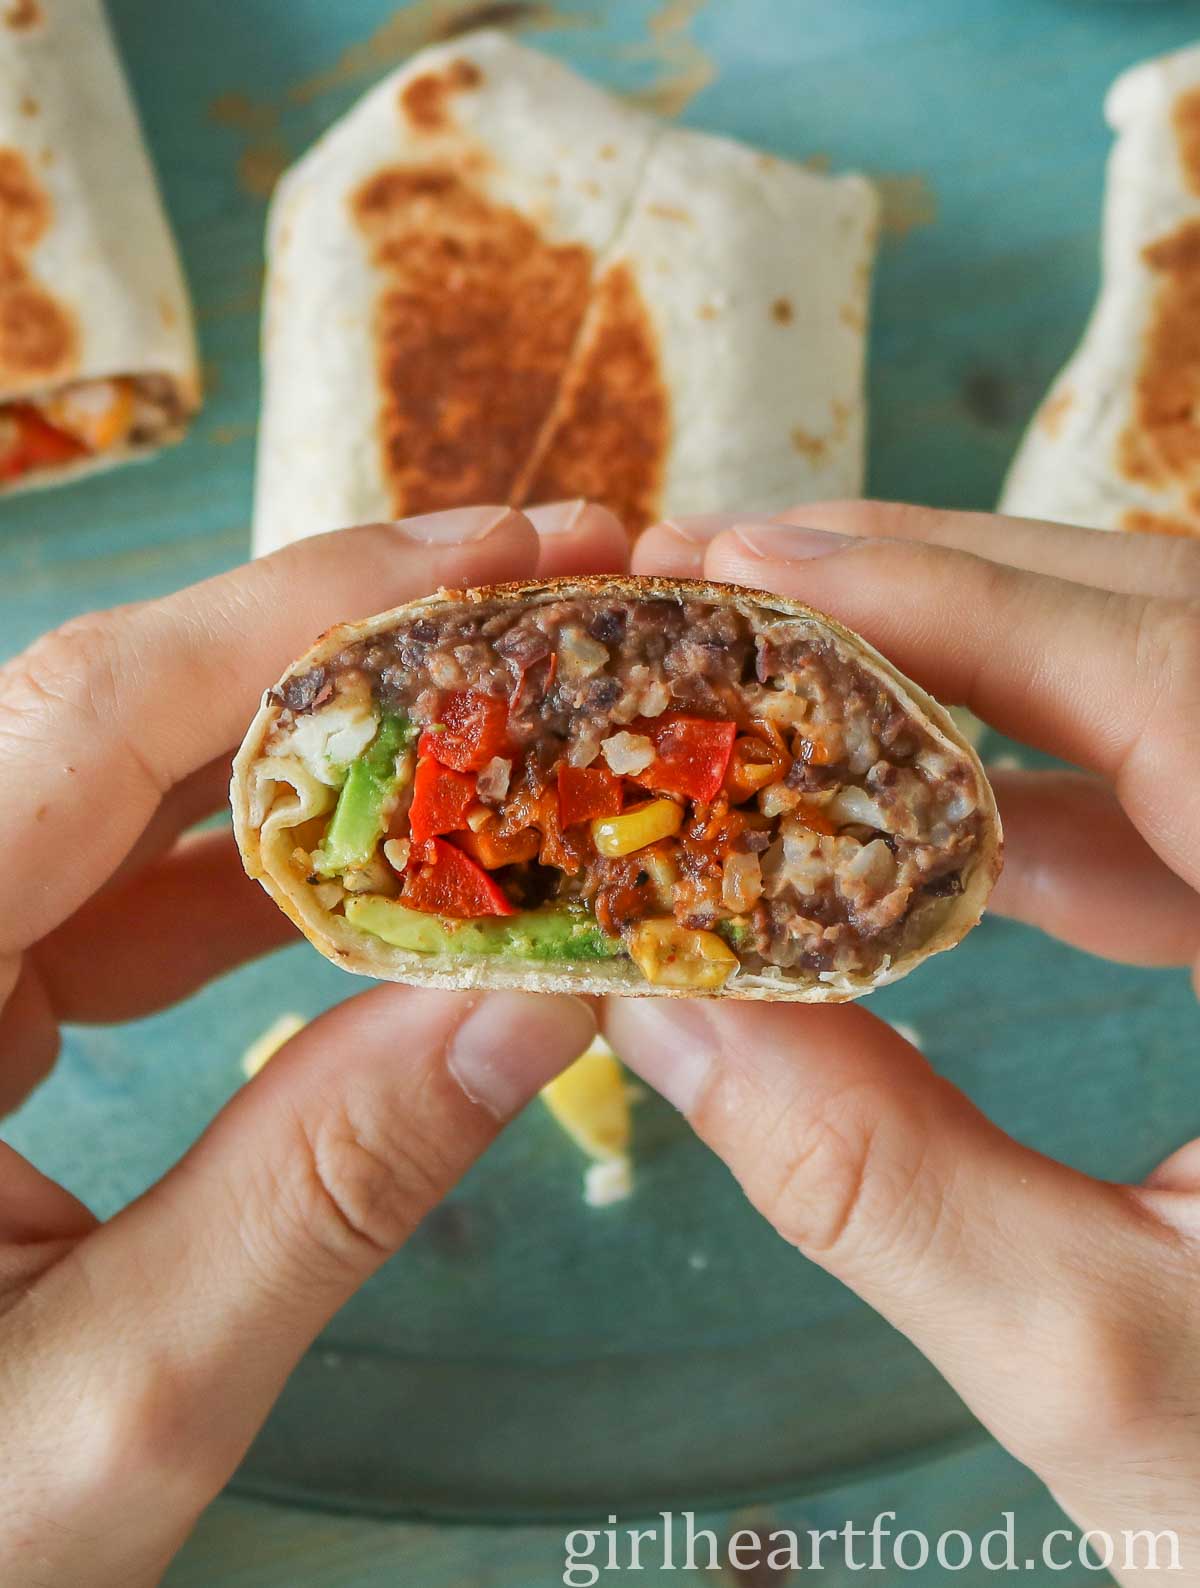 Two hands holding a refried bean burrito.